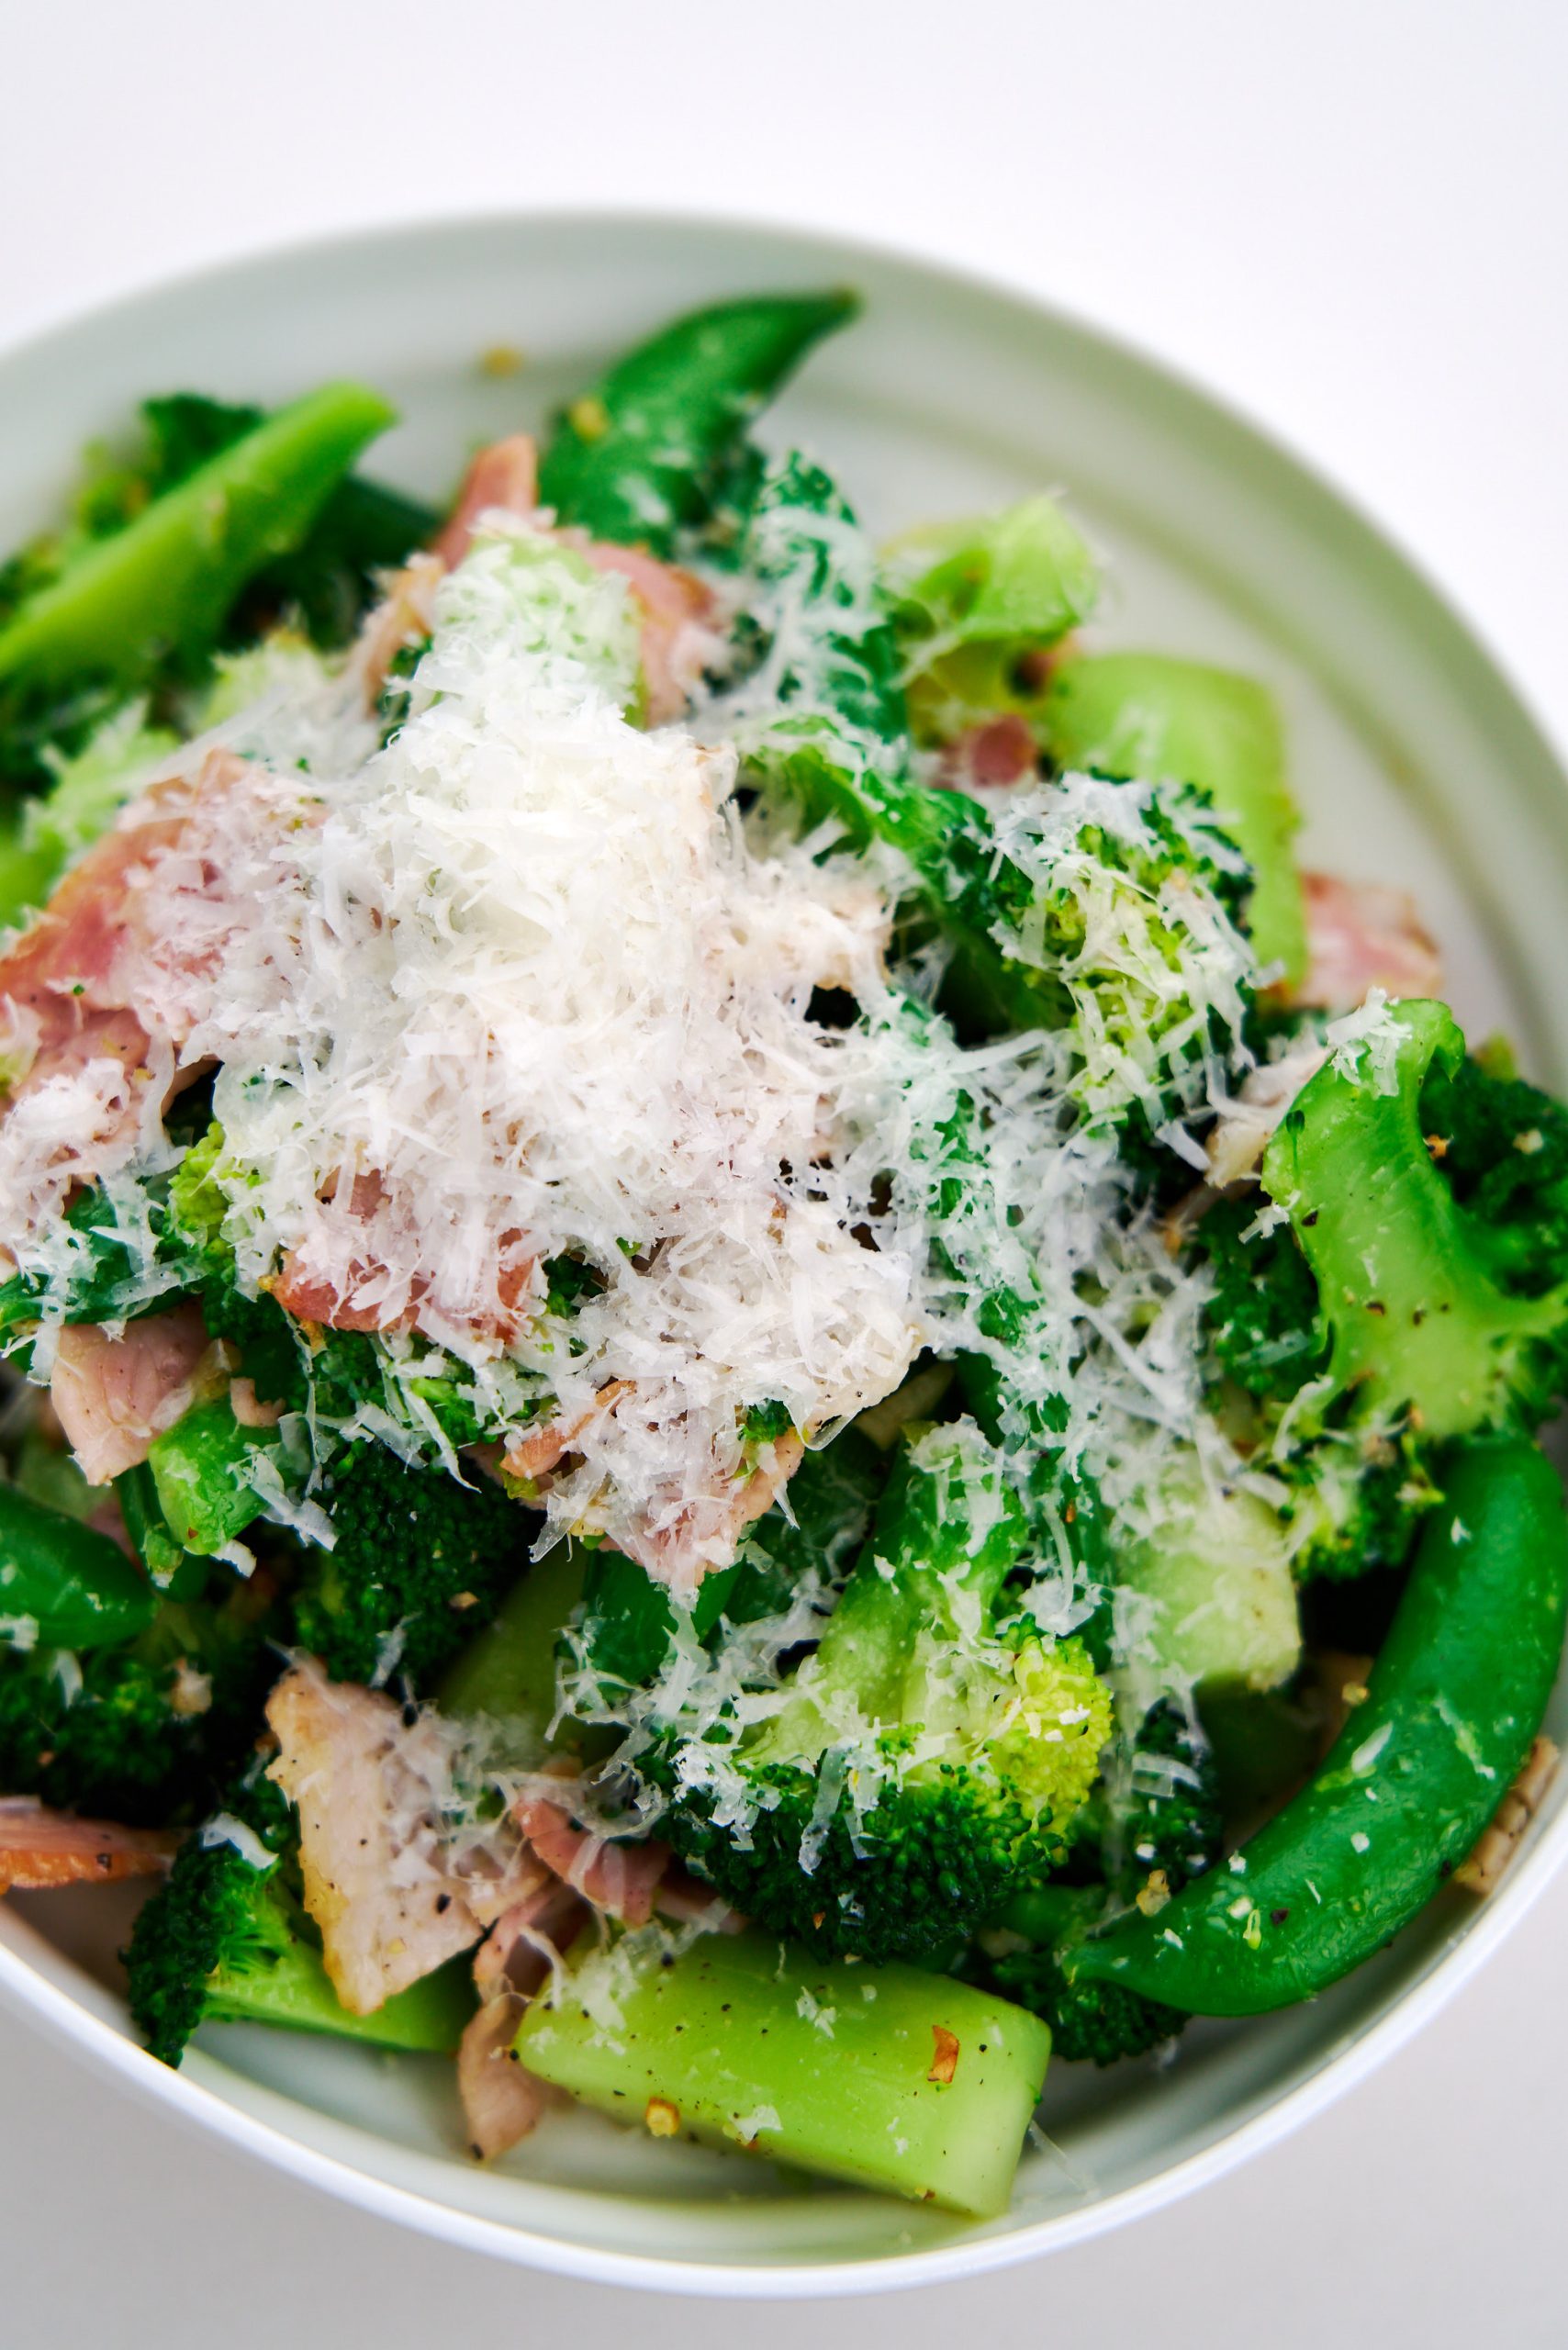 Broccoli, Snap Peas, and Ham, ready to serve